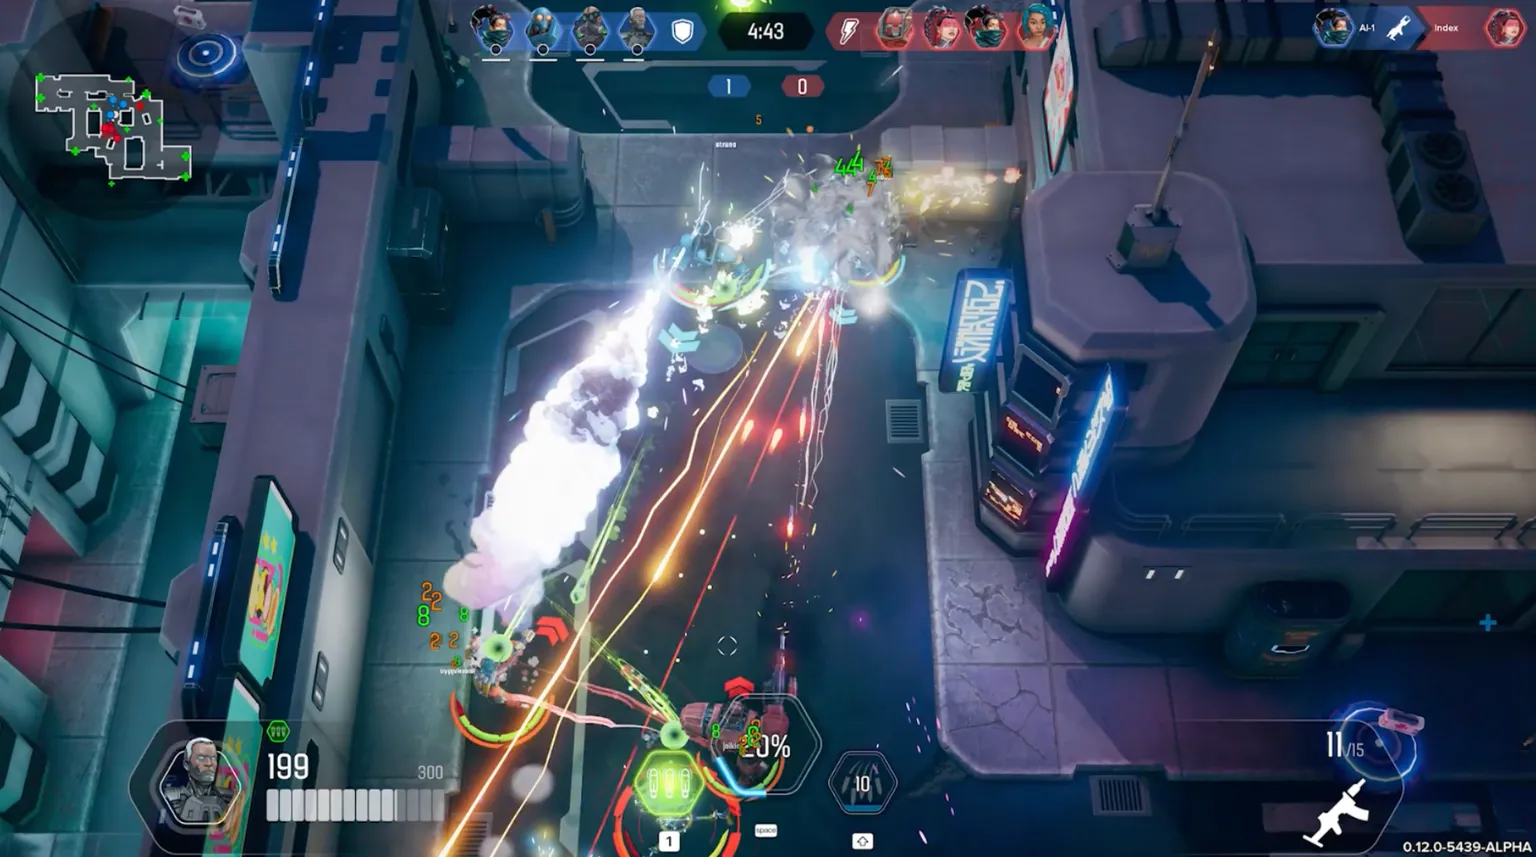 A still from in-game footage of Machines Arena, showing a top-down view of a 4v4 shooter game where heroes have weapons and shoot beams of magical light and missiles at each other.